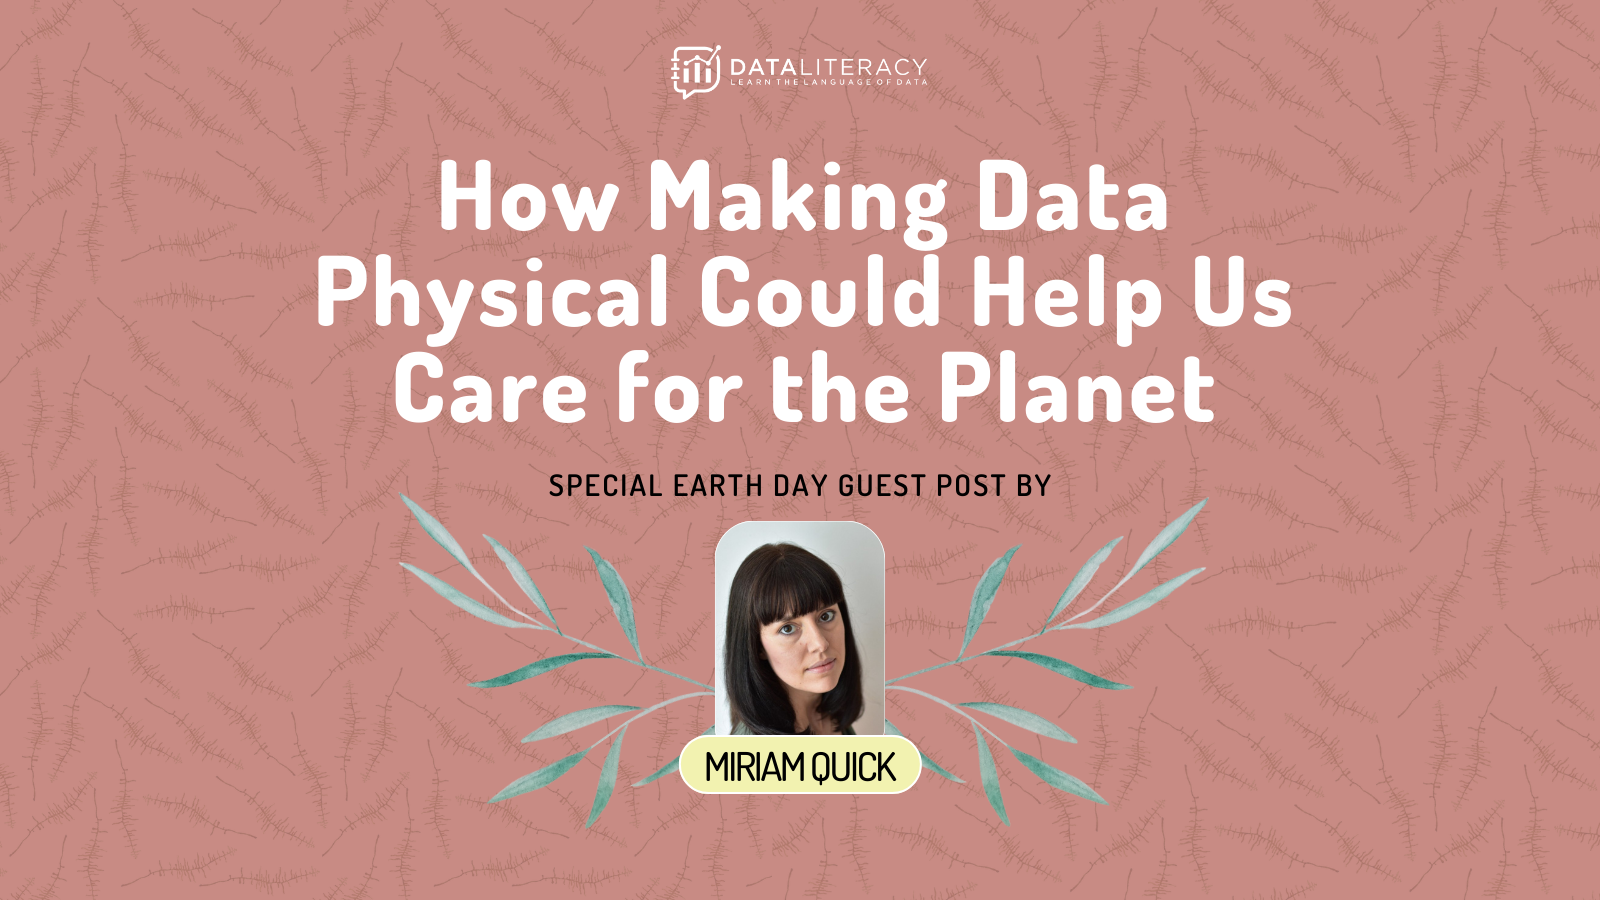 header image with light red background, green leaves, woman named Miriam Quick's small portrait, and the title "How making data physical could help us care for the planet"